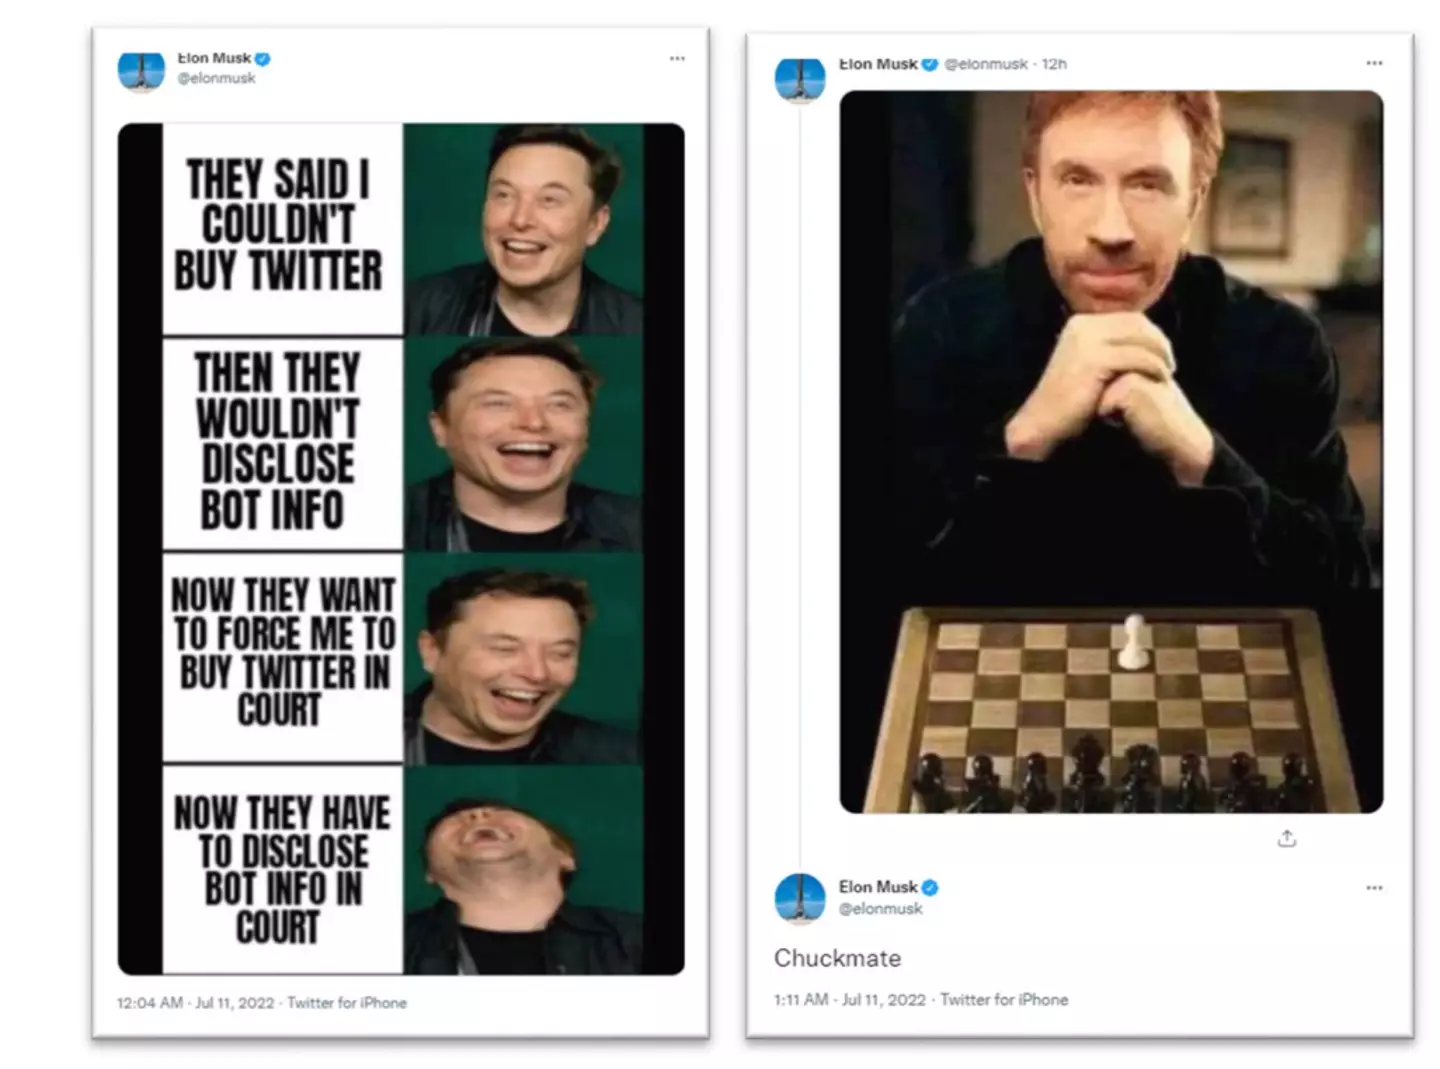 A few examples of Musk's many meme tweets.